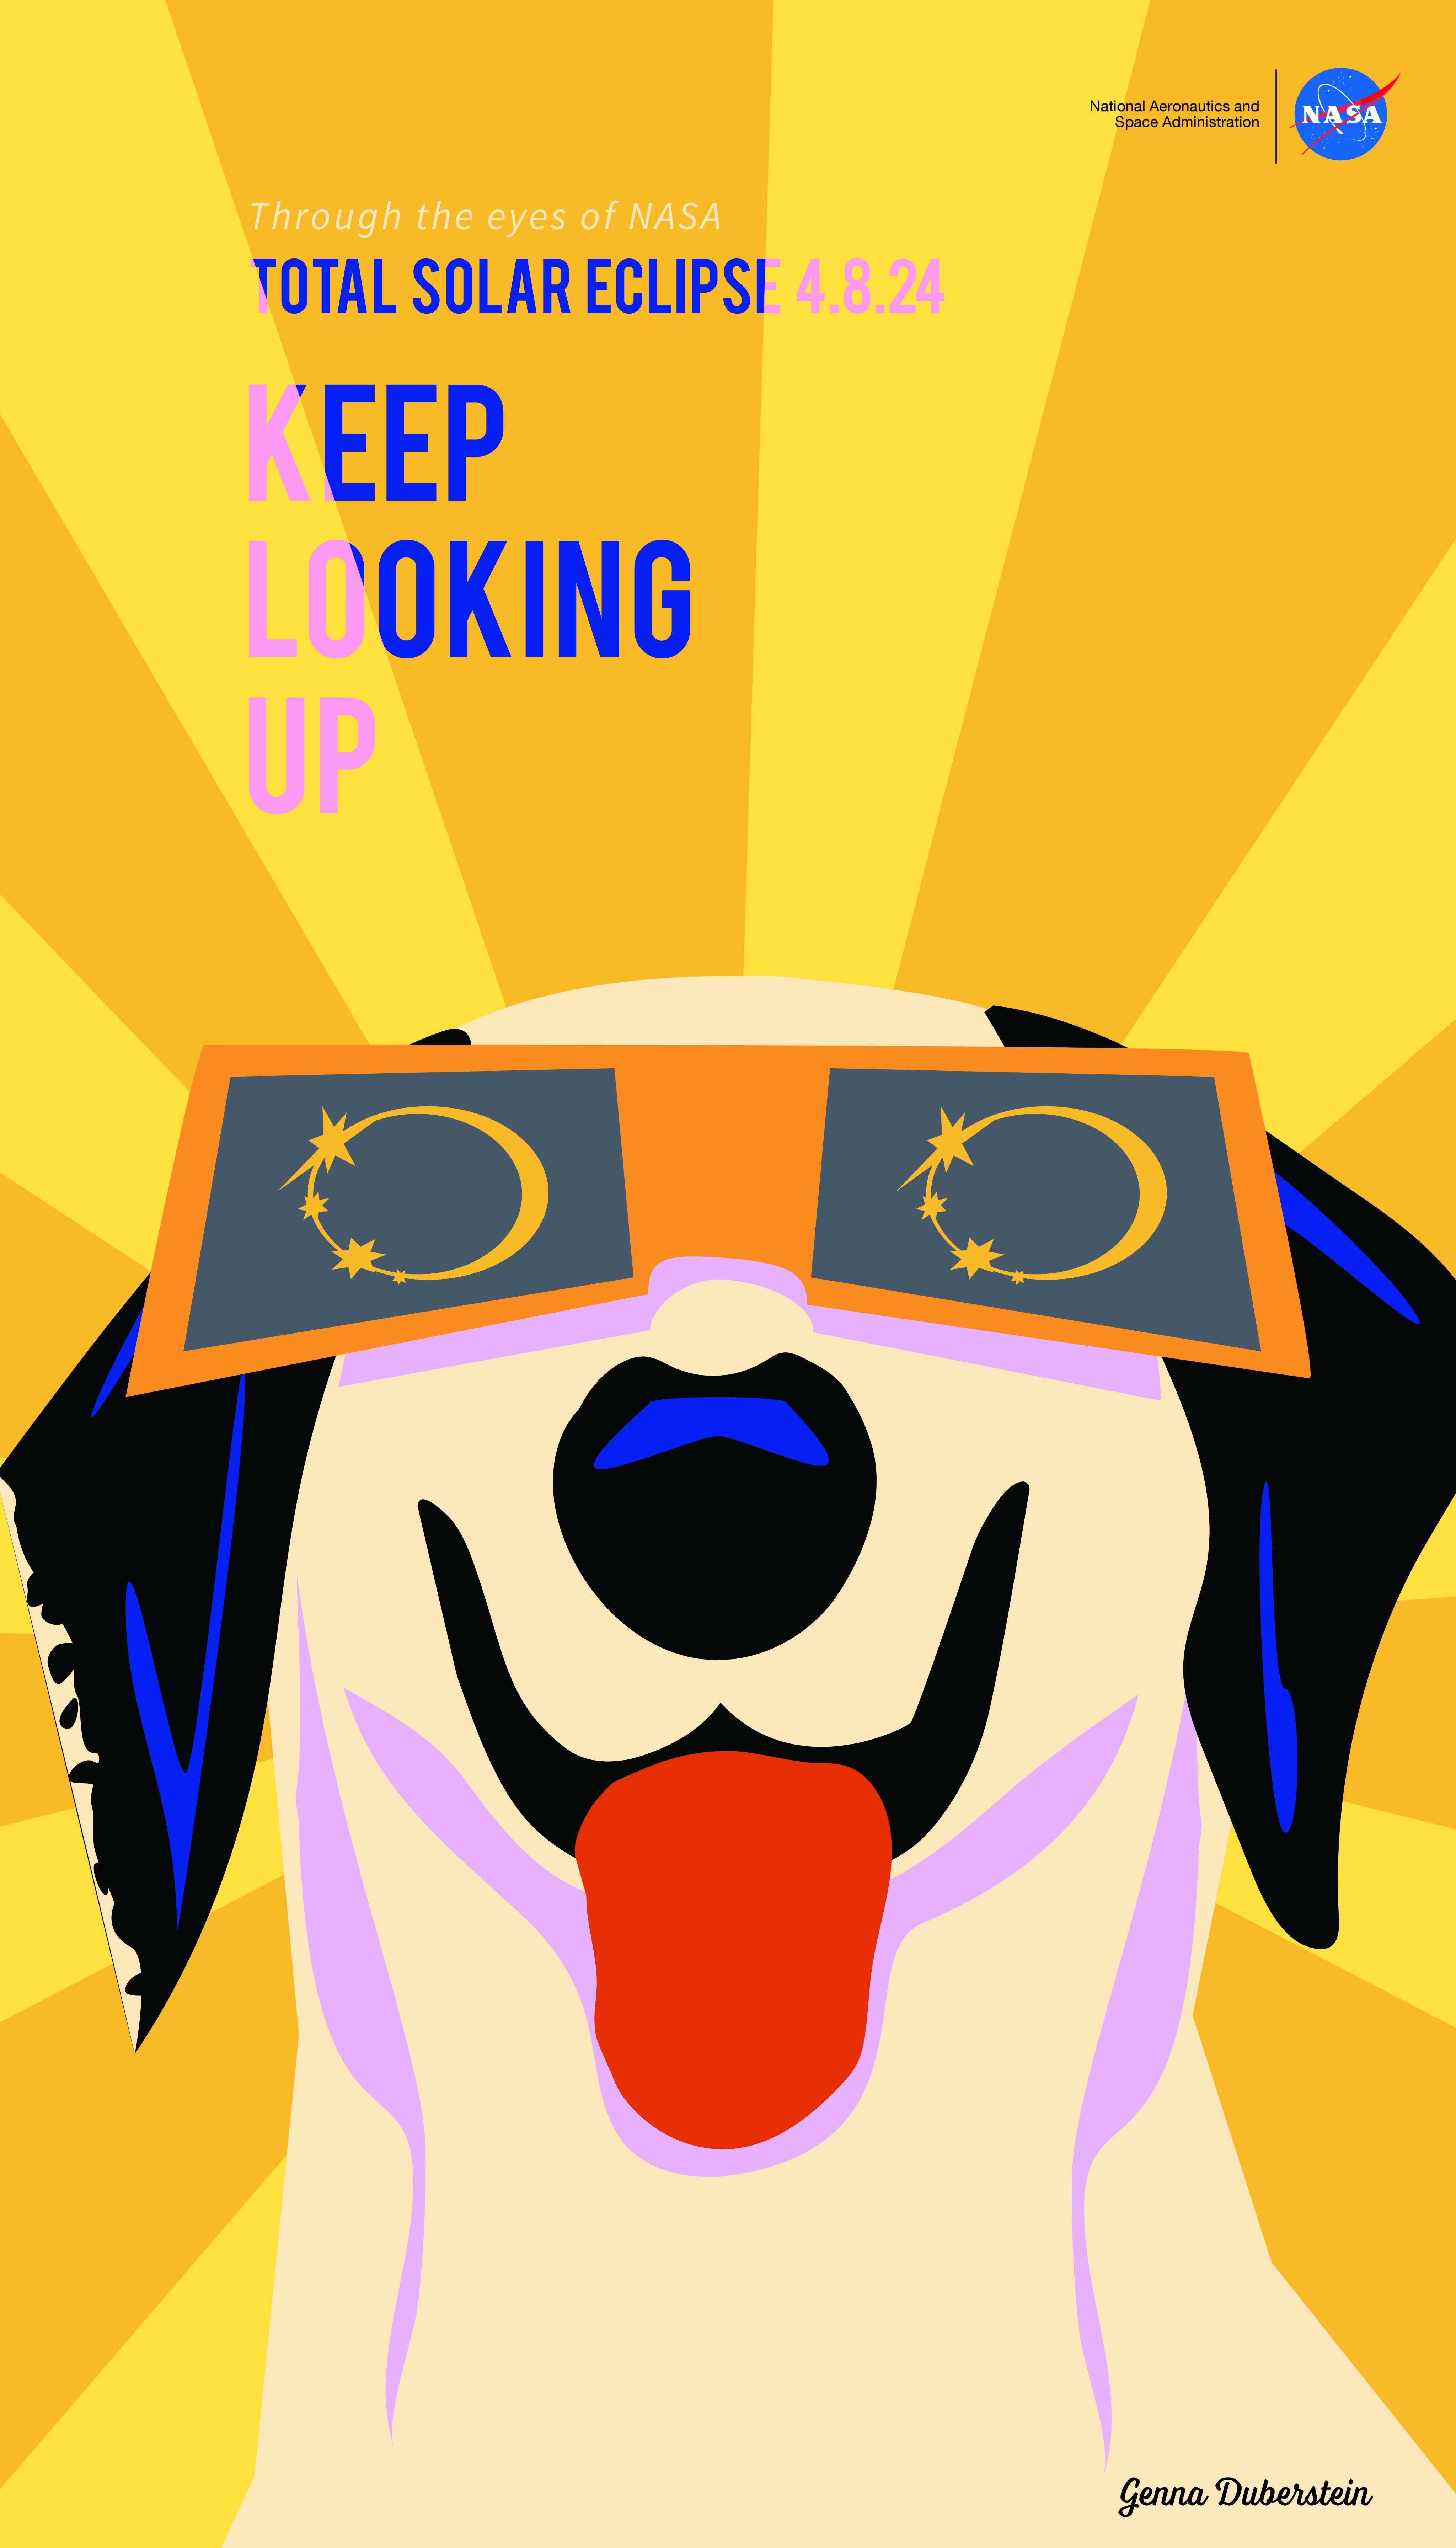 Against a gold and yellow background, a dog with a white face, black nose, black ears, and red tongue looks up. The dog is wearing orange eclipse glasses that are reflecting a solar eclipse in the lenses. In the top left, it reads "Through the eyes of NASA, Total Solar Eclipse 4.8.24, Keep looking up."